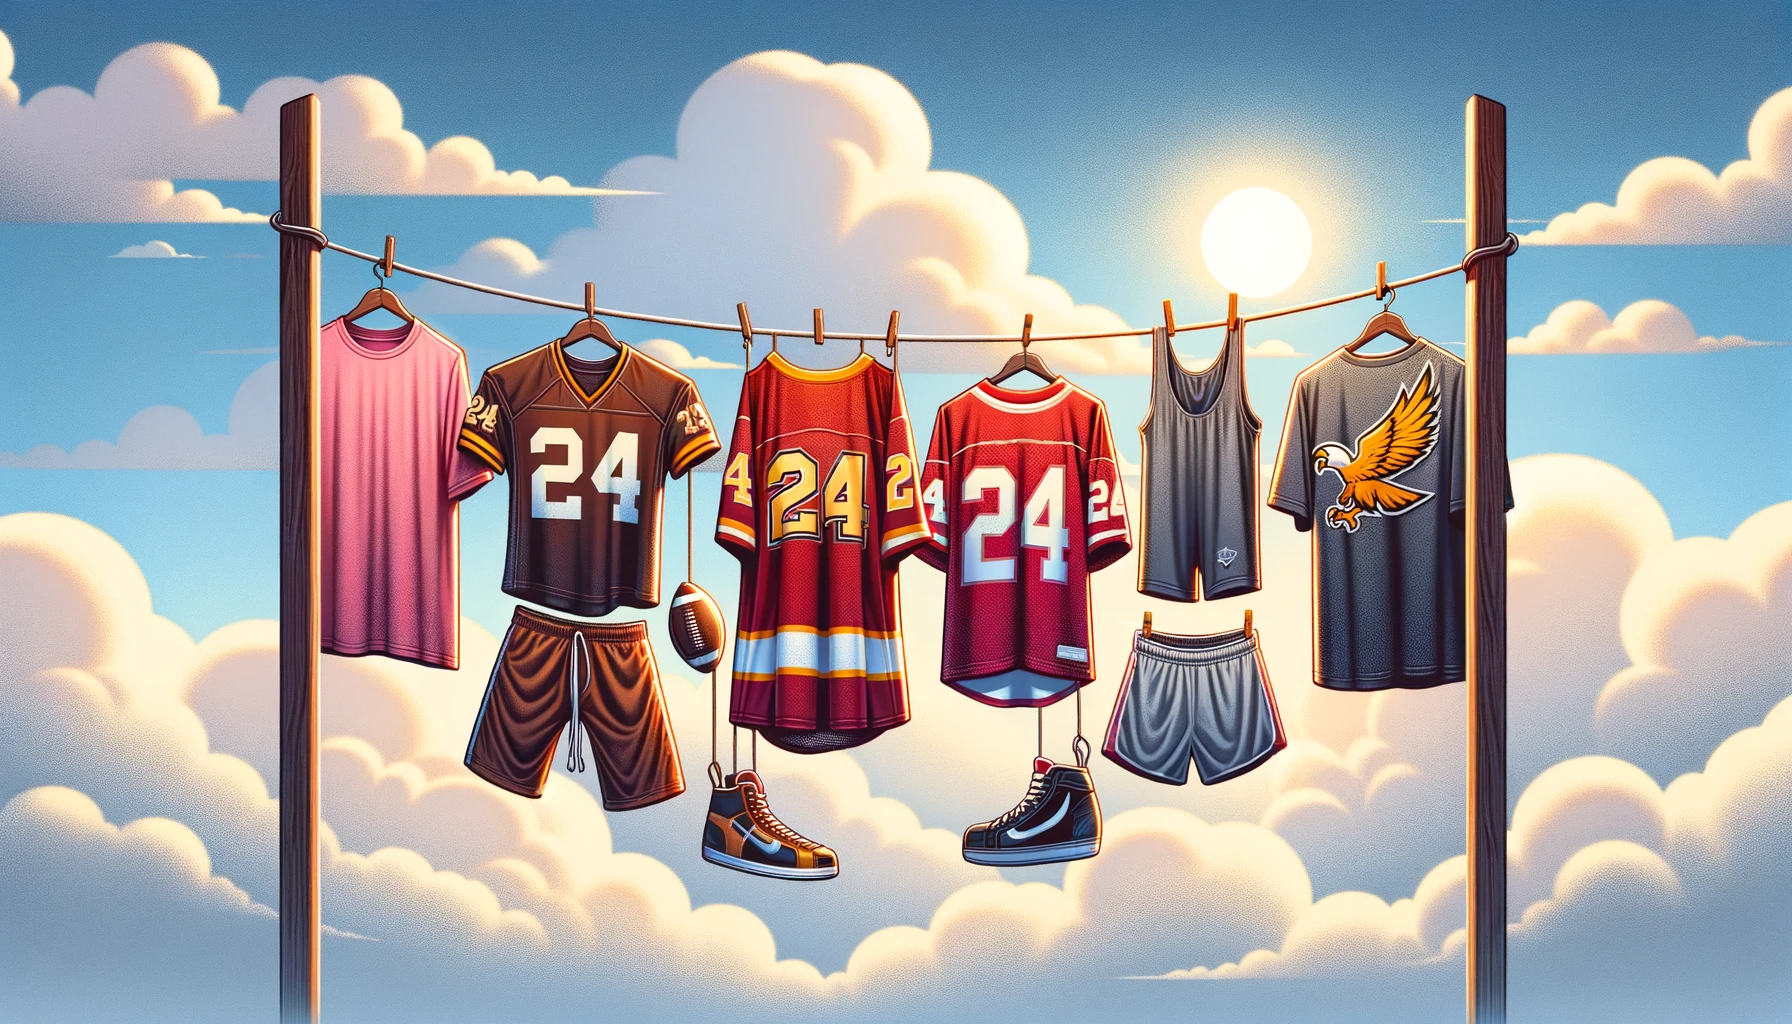 Sports jerseys and shorts hanging on a clothesline